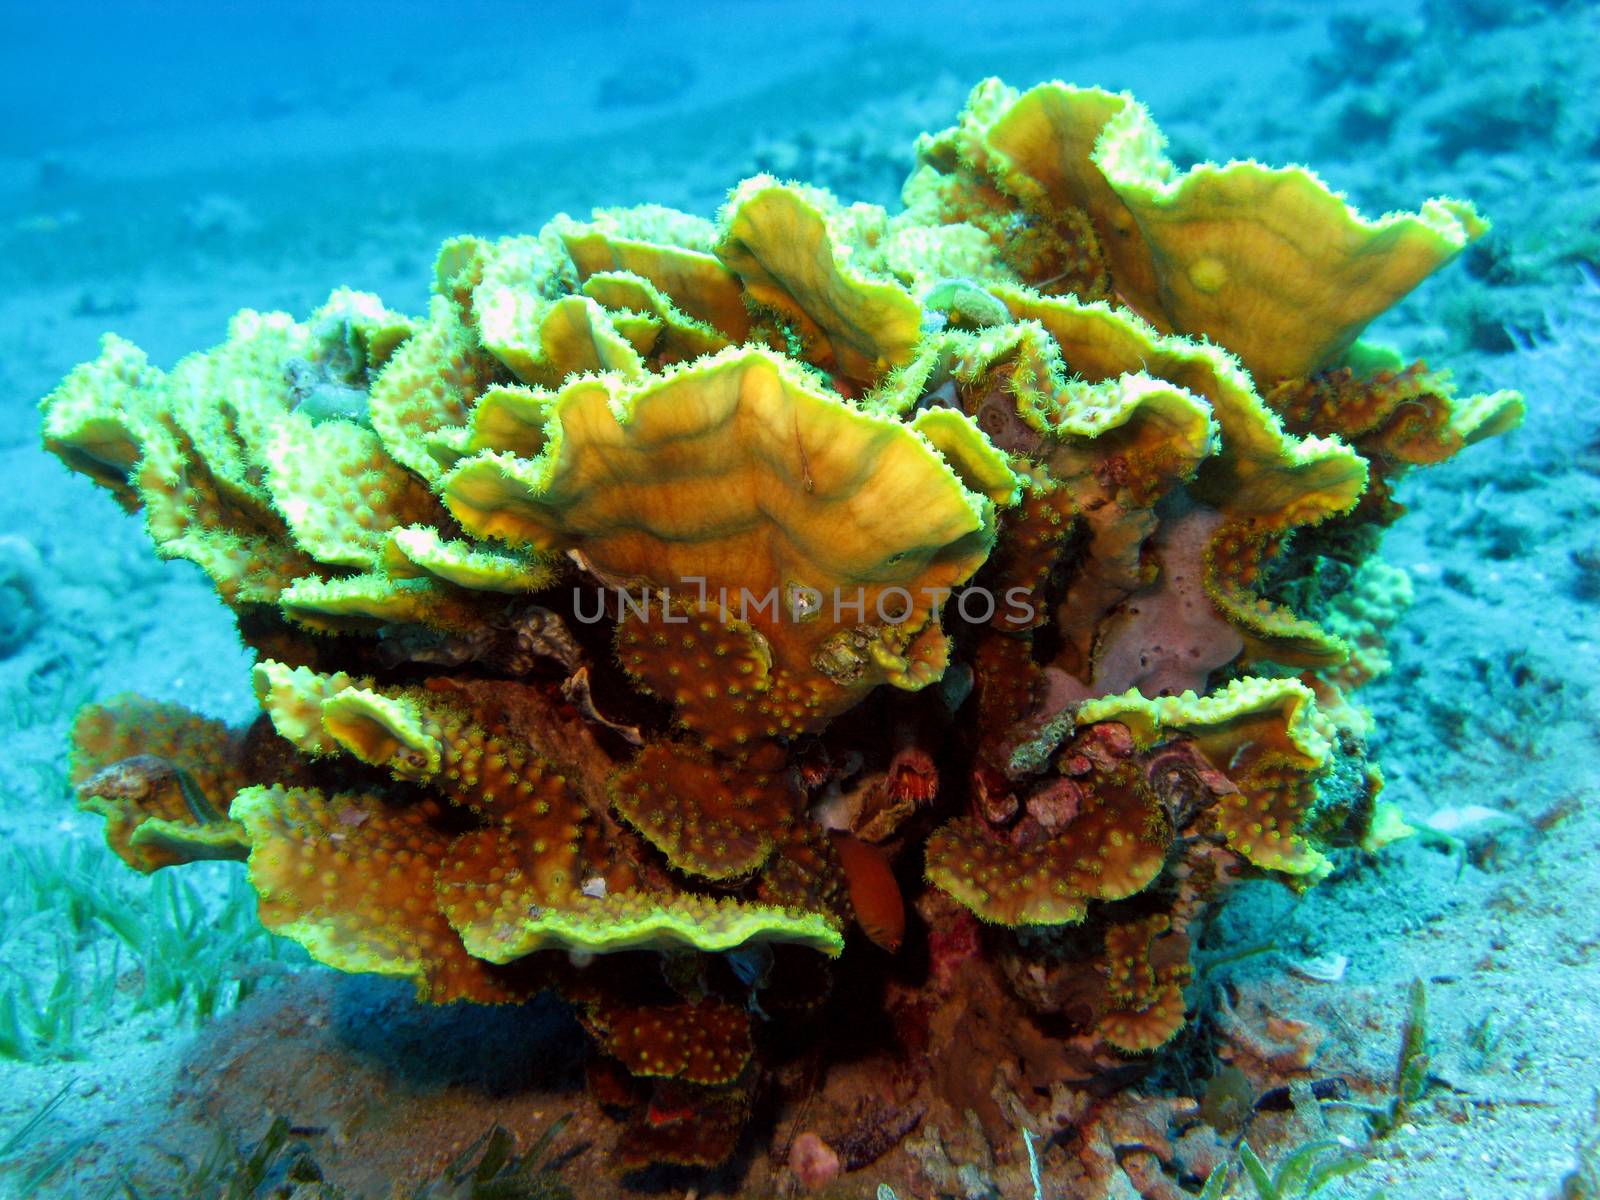 coral reef with great yellow  coral Turbinaria reniformisat the bottom of tropical sea